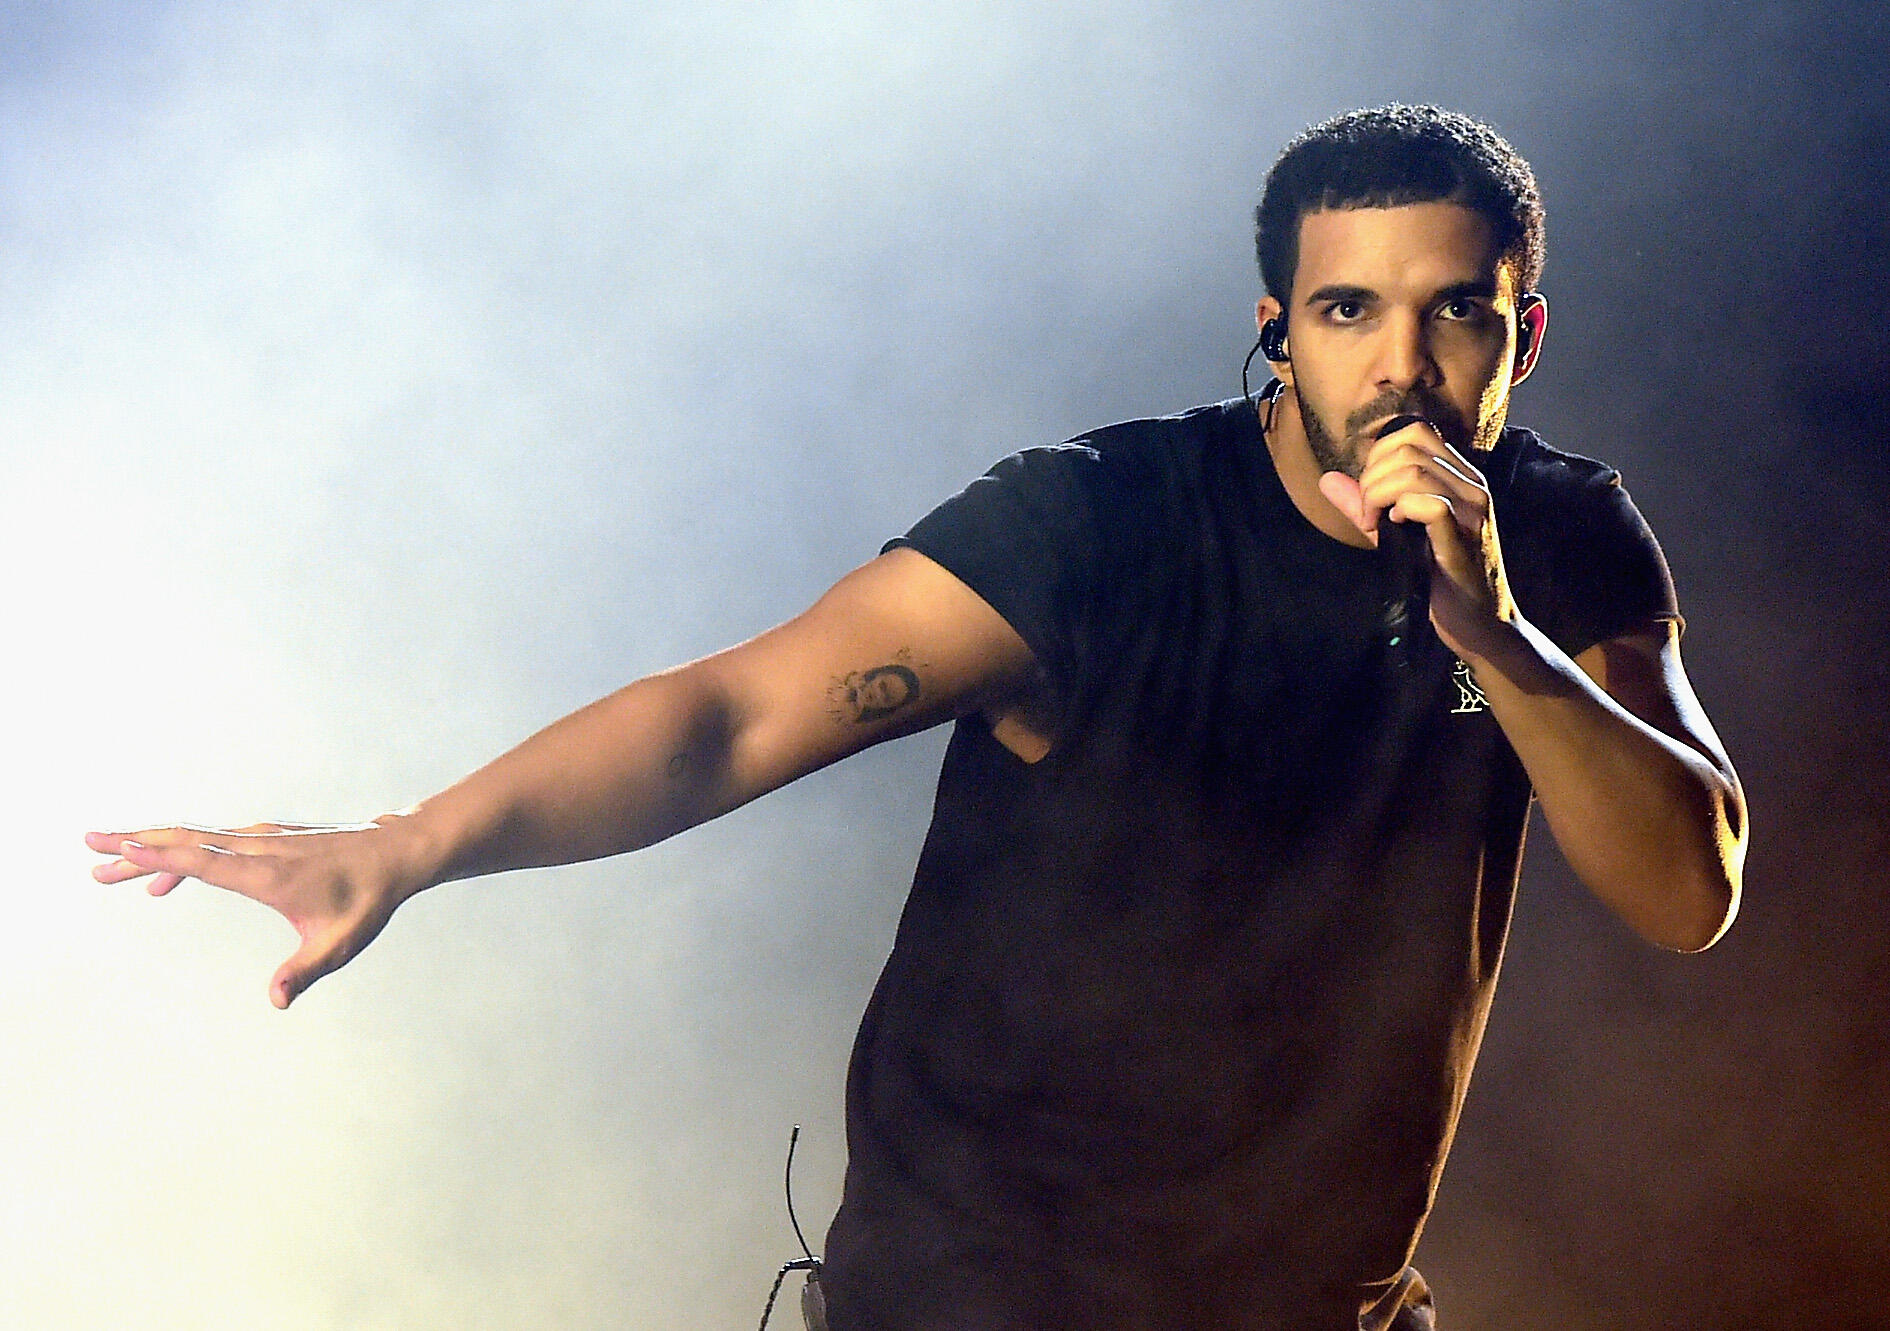 INDIO, CA - APRIL 12:  Rapper Drake performs onstage during day 3 of the 2015 Coachella Valley Music & Arts Festival (Weekend 1) at the Empire Polo Club on April 12, 2015 in Indio, California.  (Photo by Kevin Winter/Getty Images for Coachella)